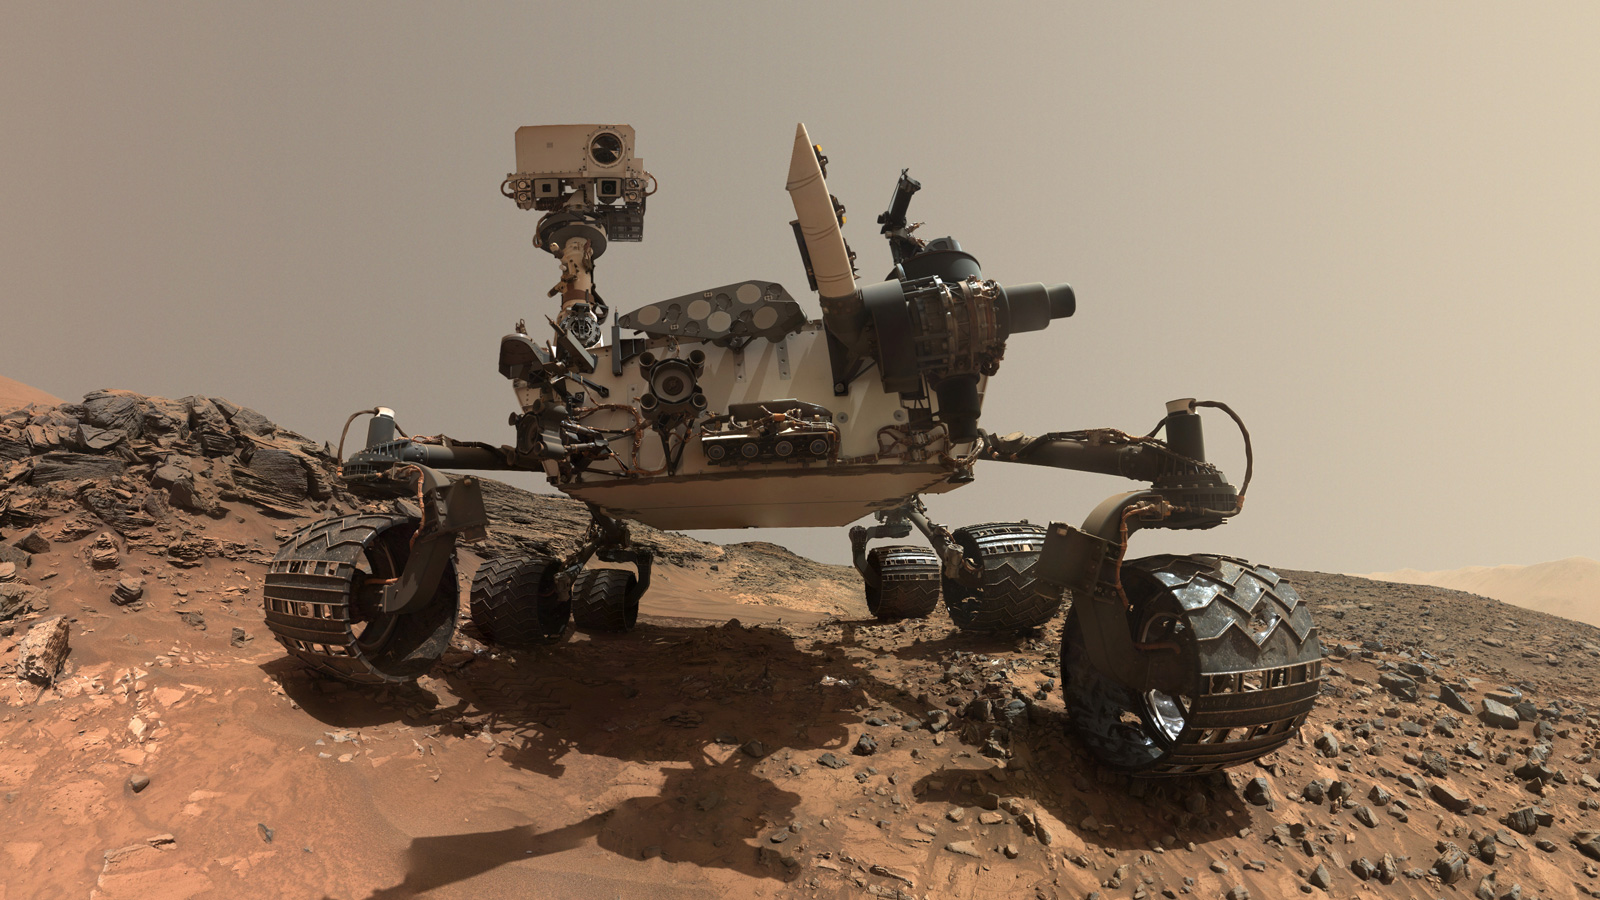 Image of the curiosity rover on the surface of Mars, the 4th planet from the sun.